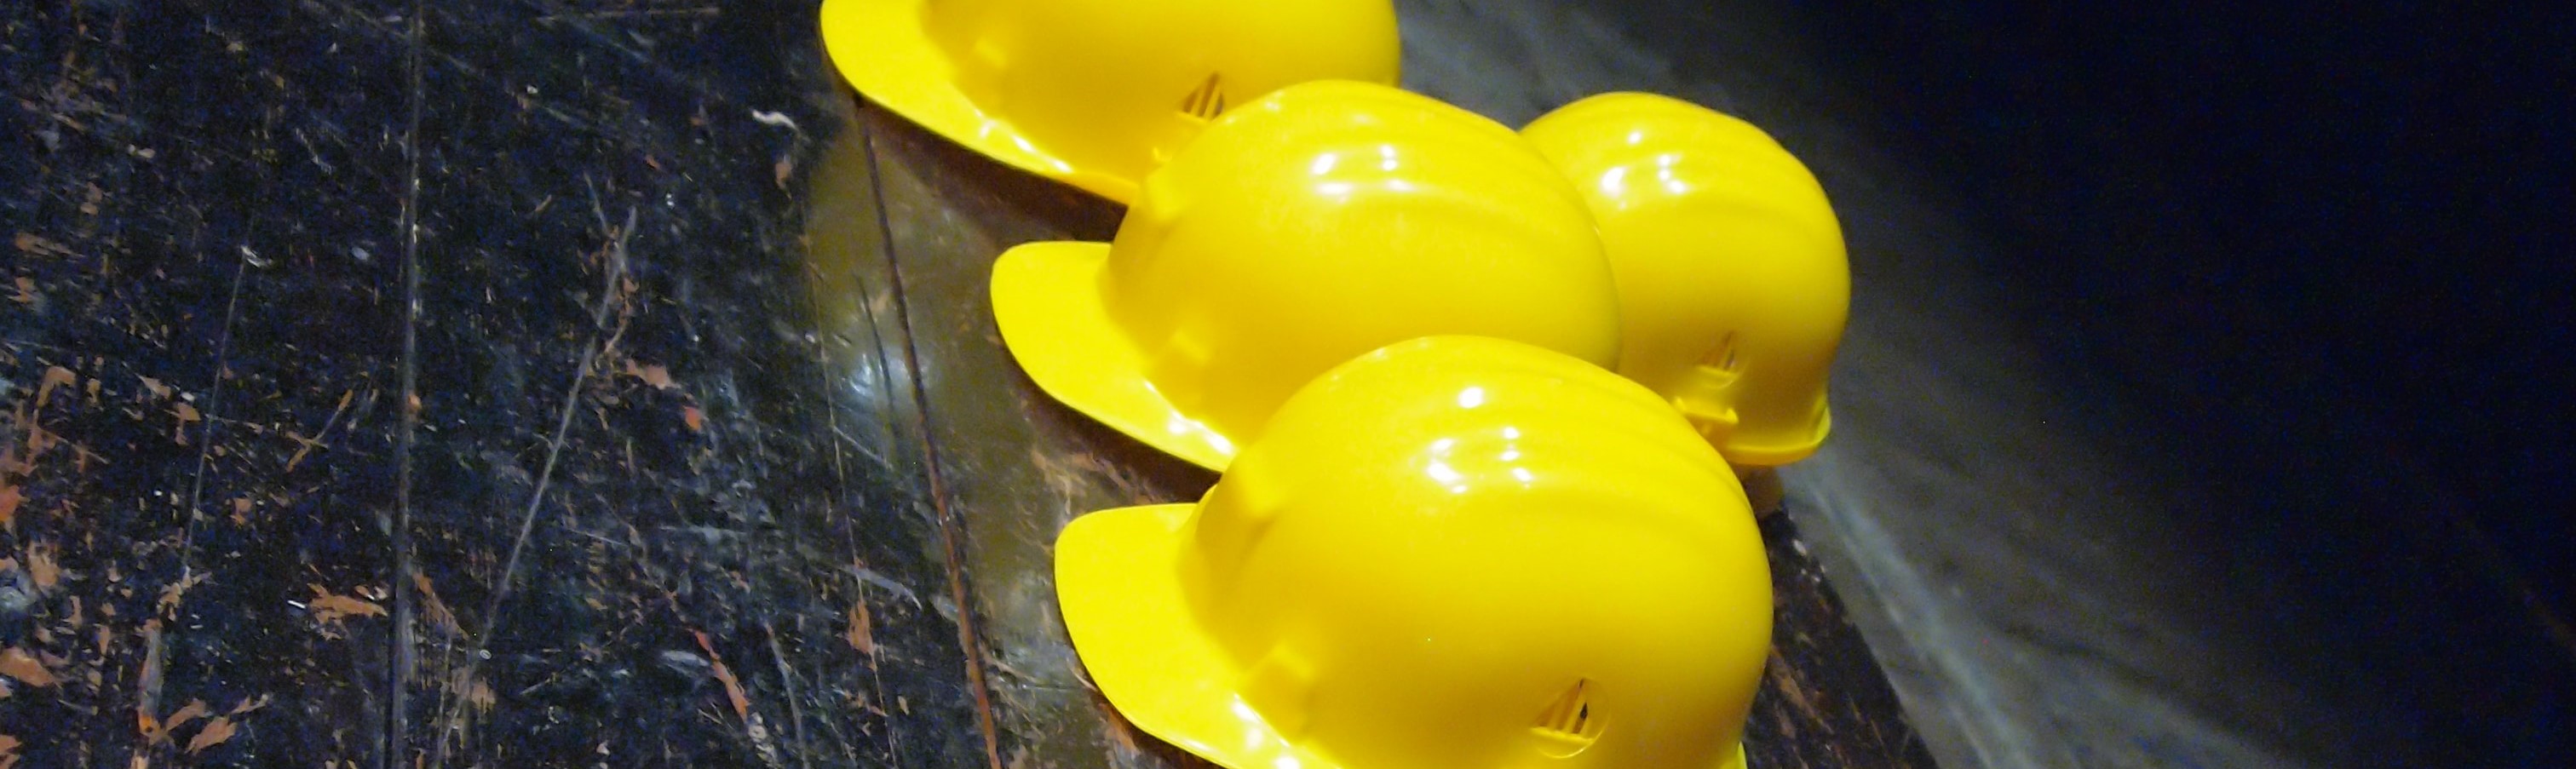 Five yellow hard hats on gray surface